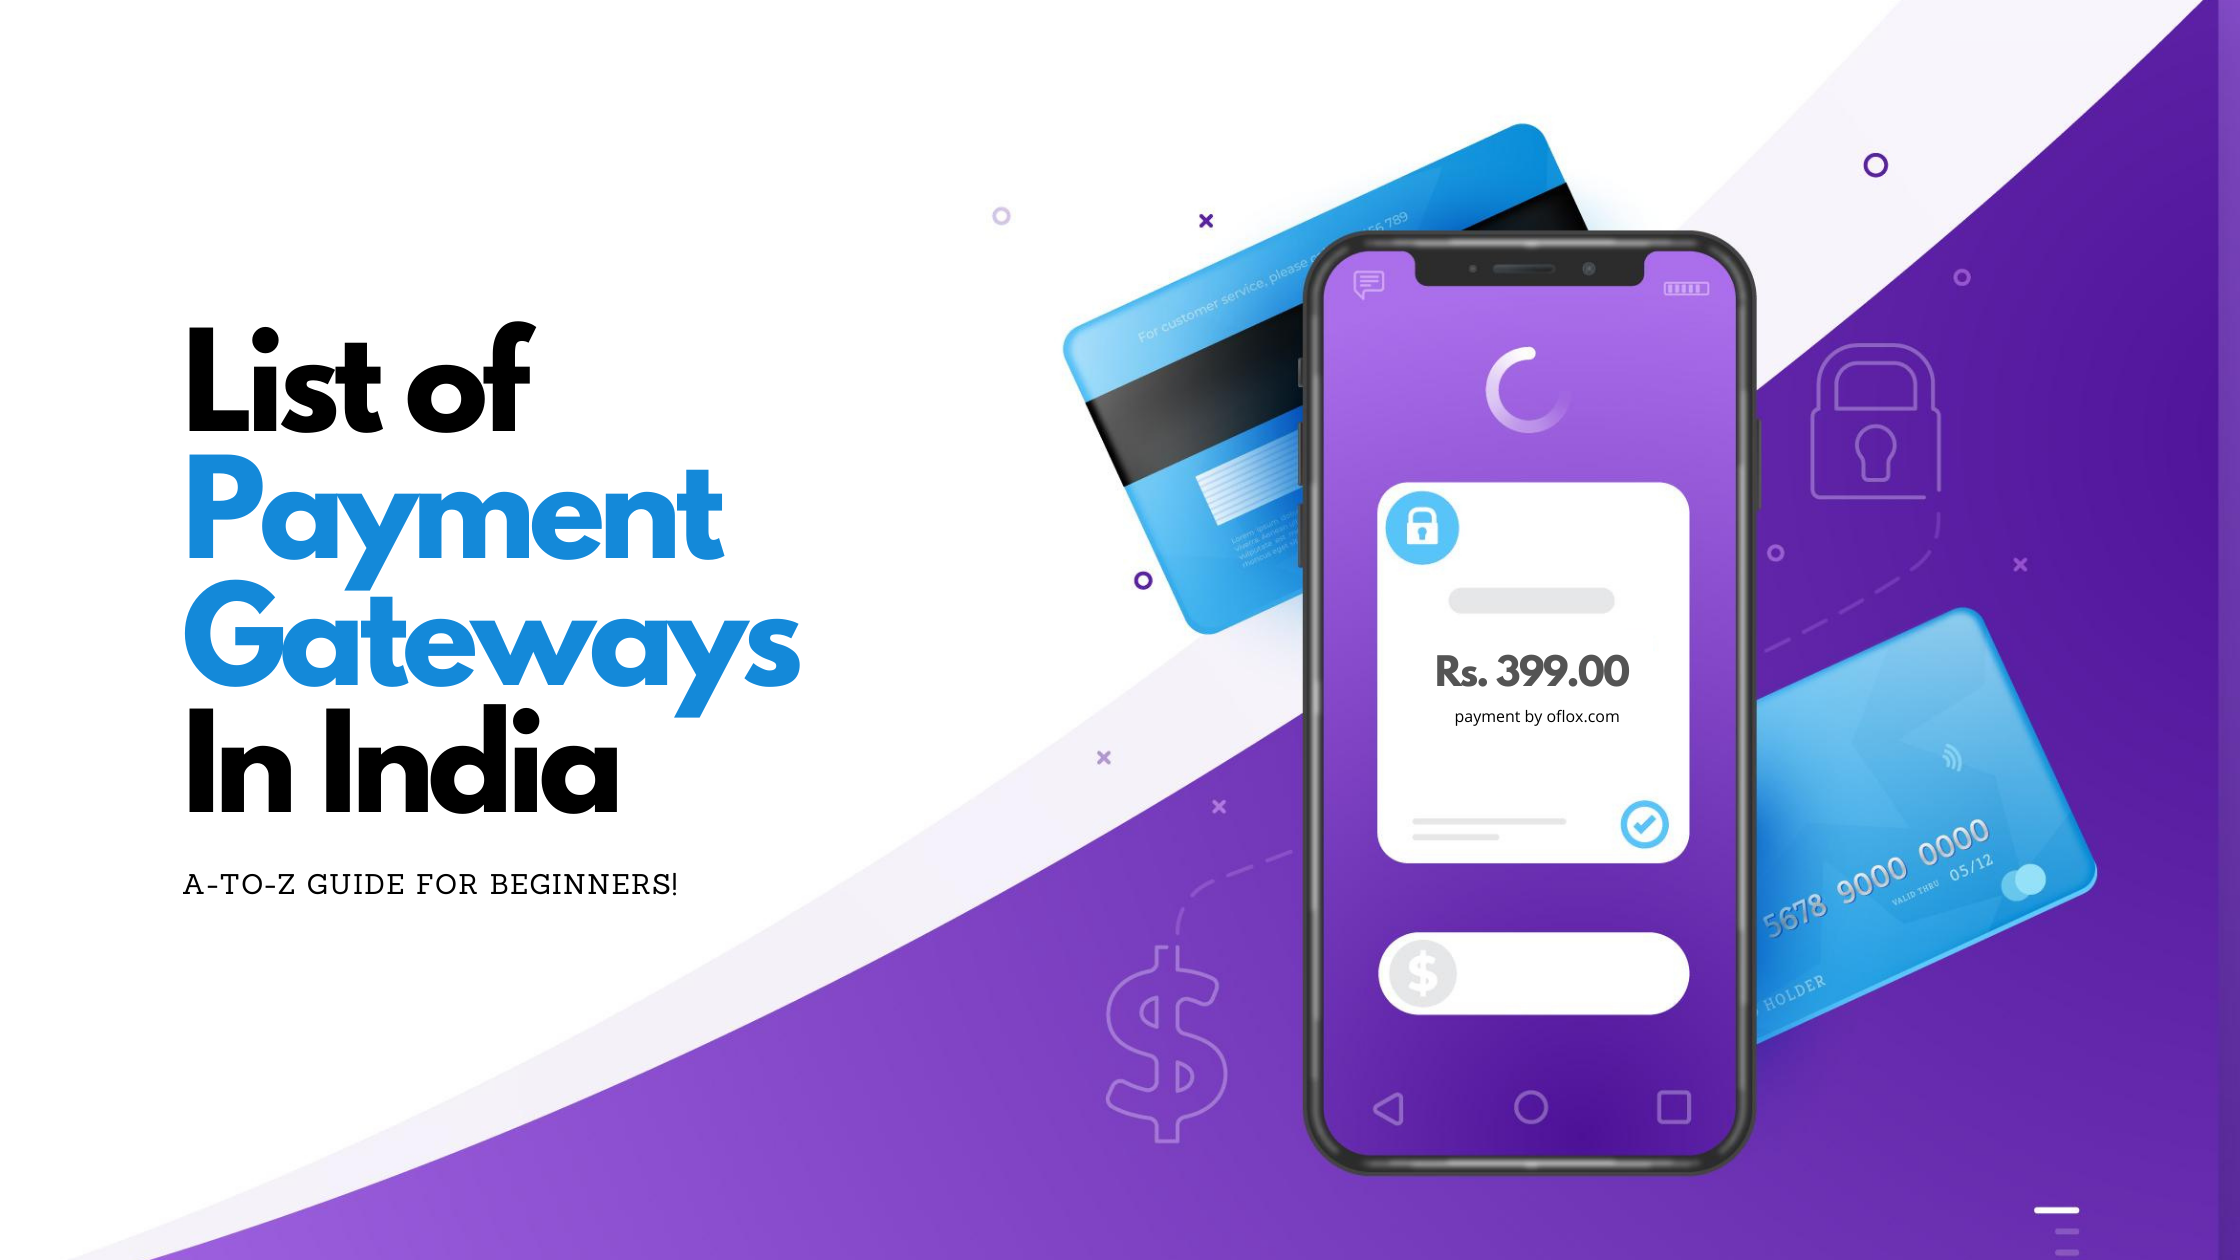 List of Payment Gateways In India